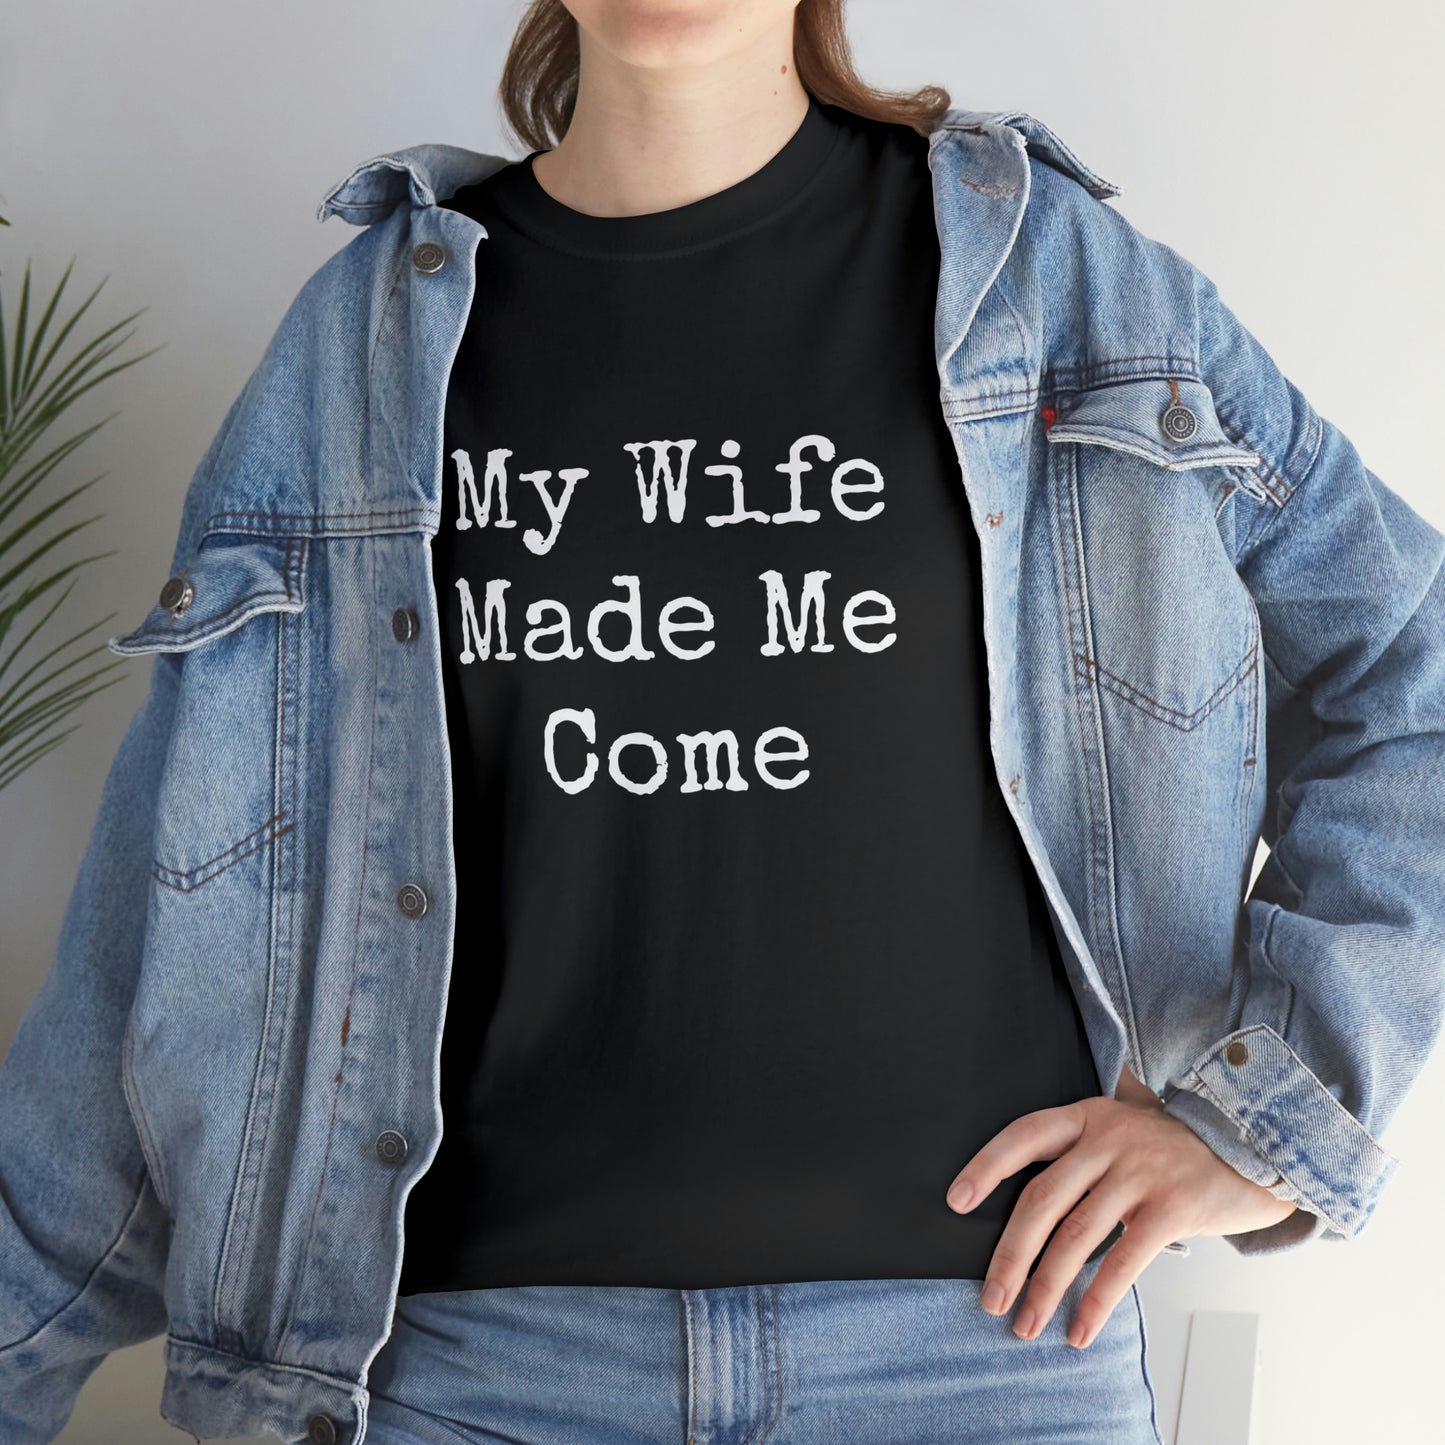 MY WIFE MADE ME COME T-SHIRT